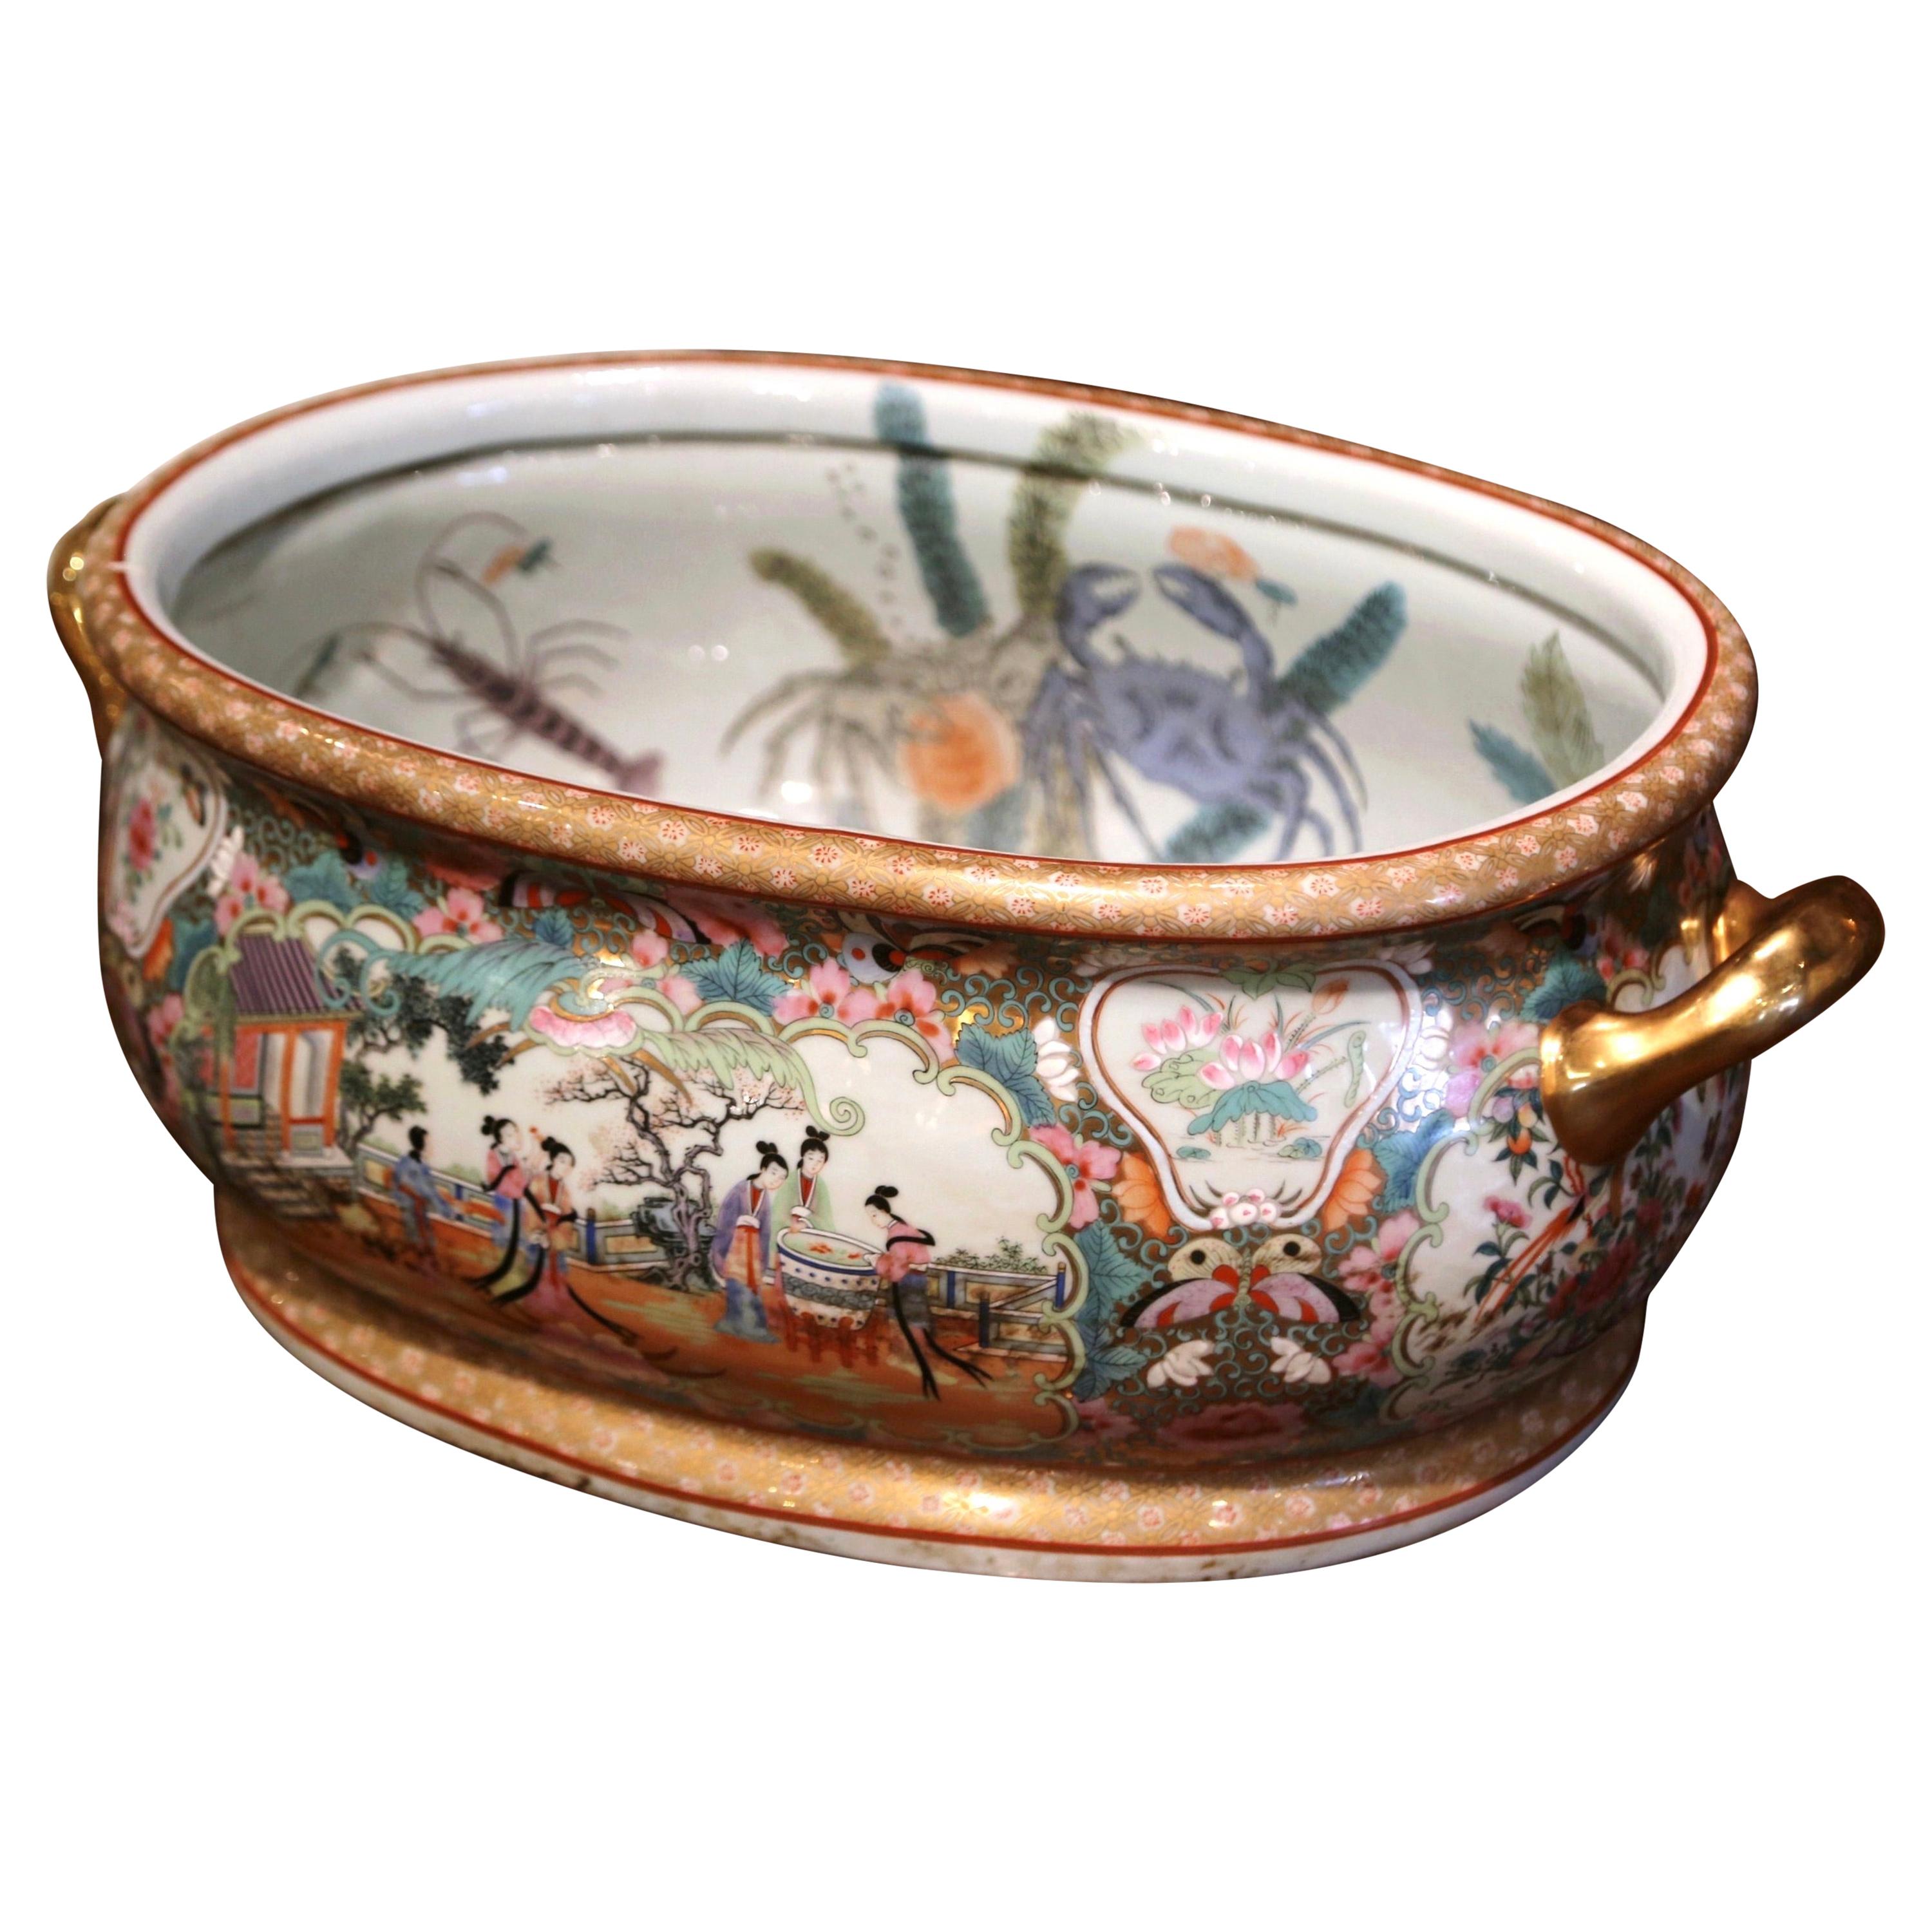 Early 20th Century Japanese Painted and Gilt Porcelain Foot Bath Bowl